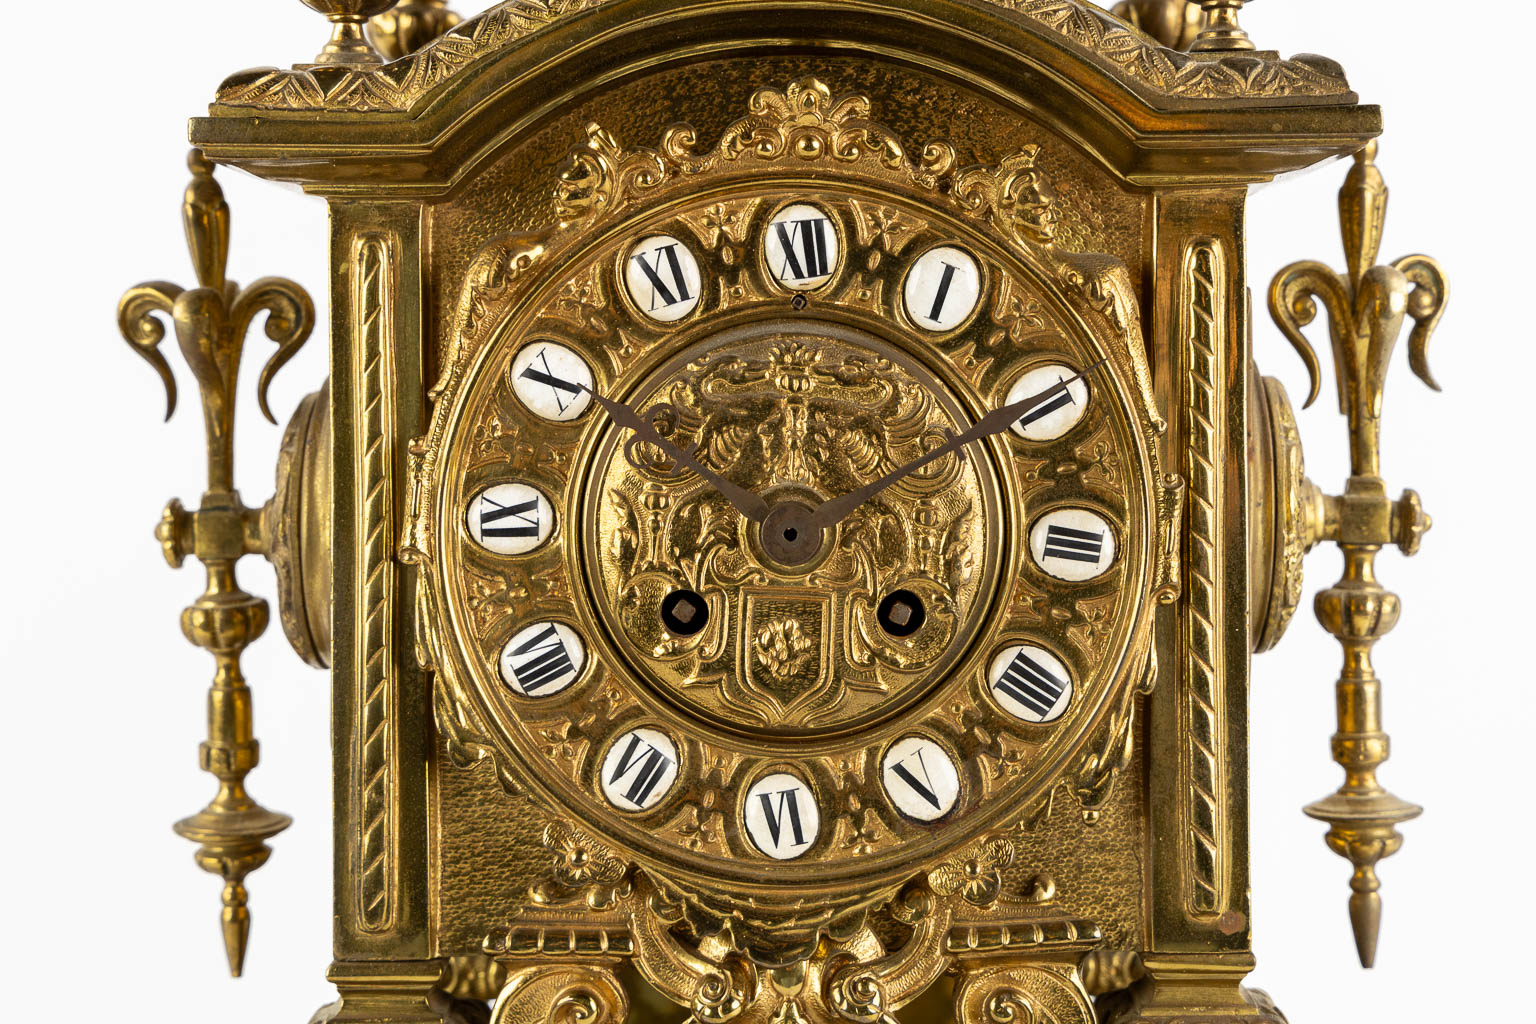 A mantle clock, bronze decorated with angels. Circa 1900. (L:21 x W:27 x H:54 cm)